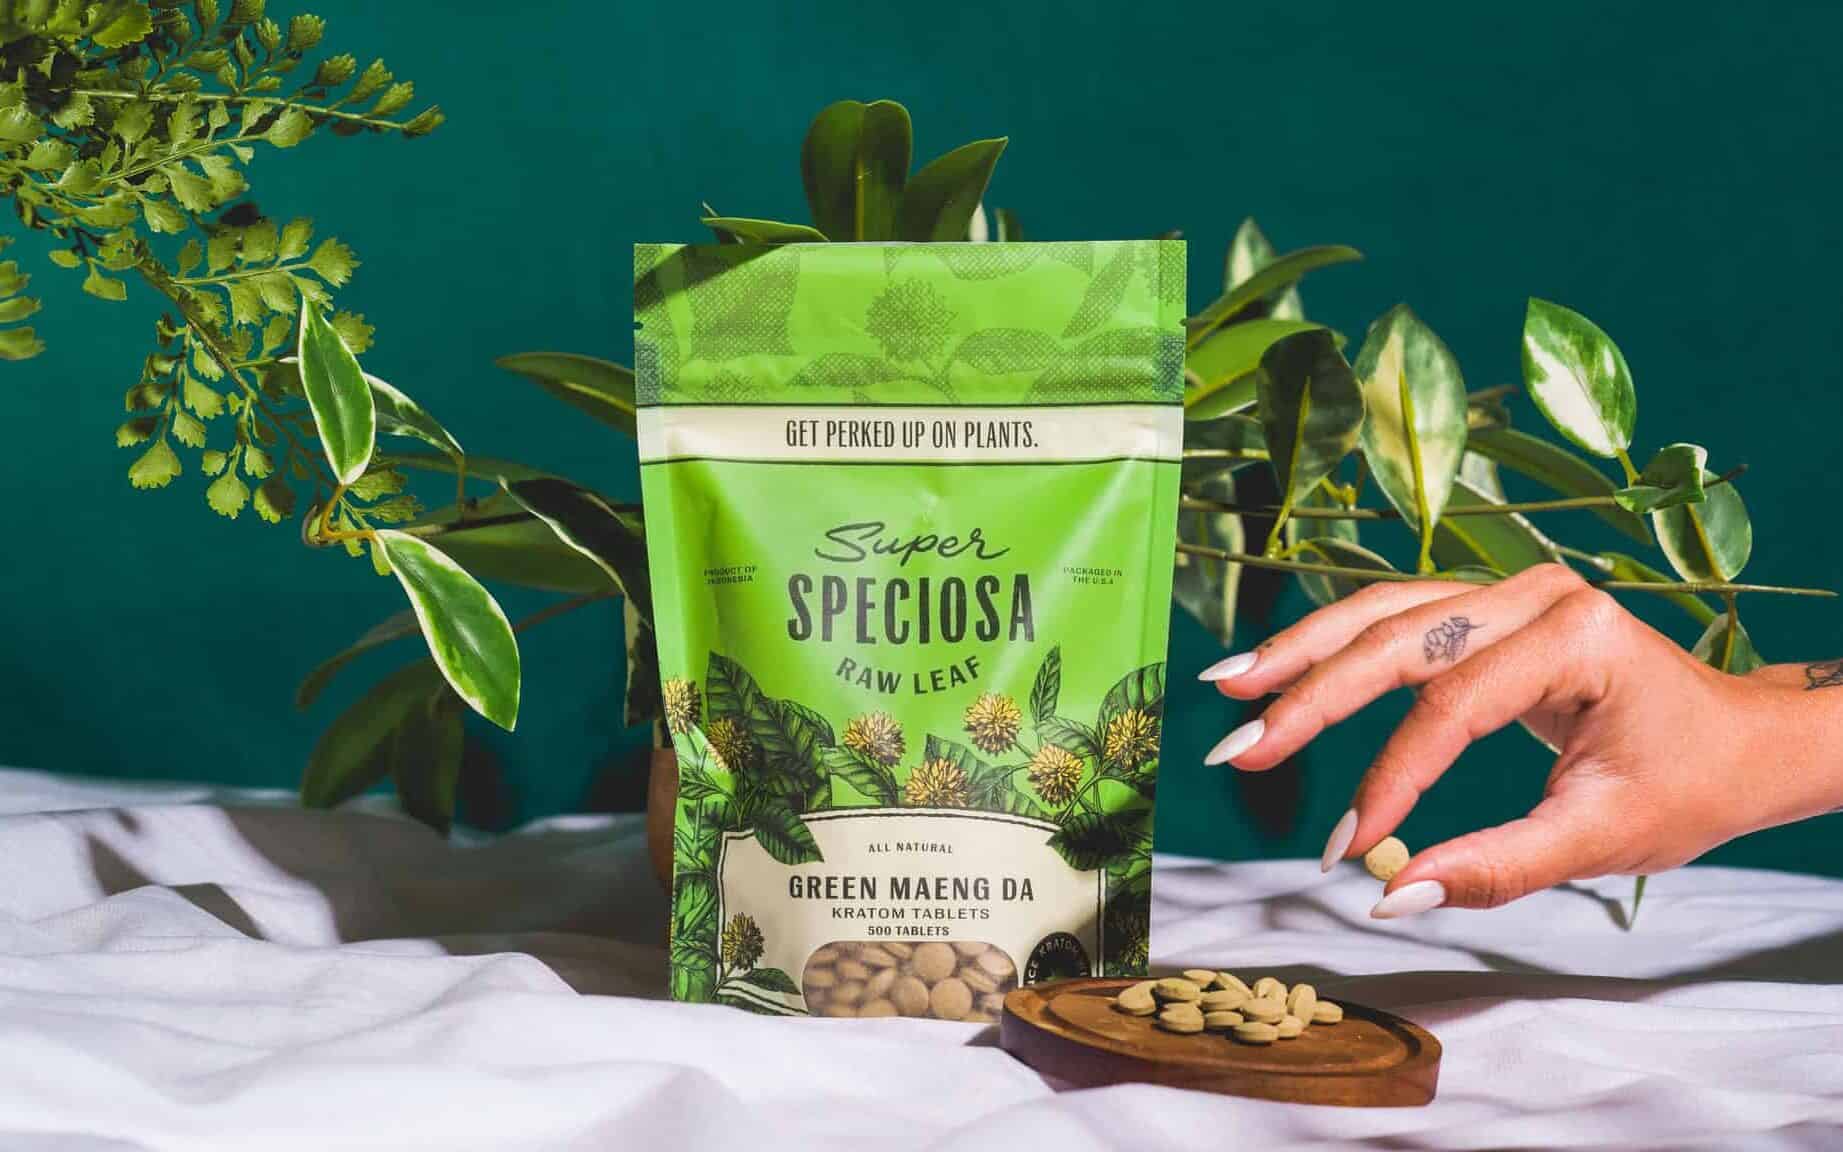 Choosing the right kratom tablets for you: Super Speciosa's Green Maeng Da kratom tablets, stylized with greenery and woman's hand picking up kratom tablet. Buy kratom tablets from Super Speciosa!